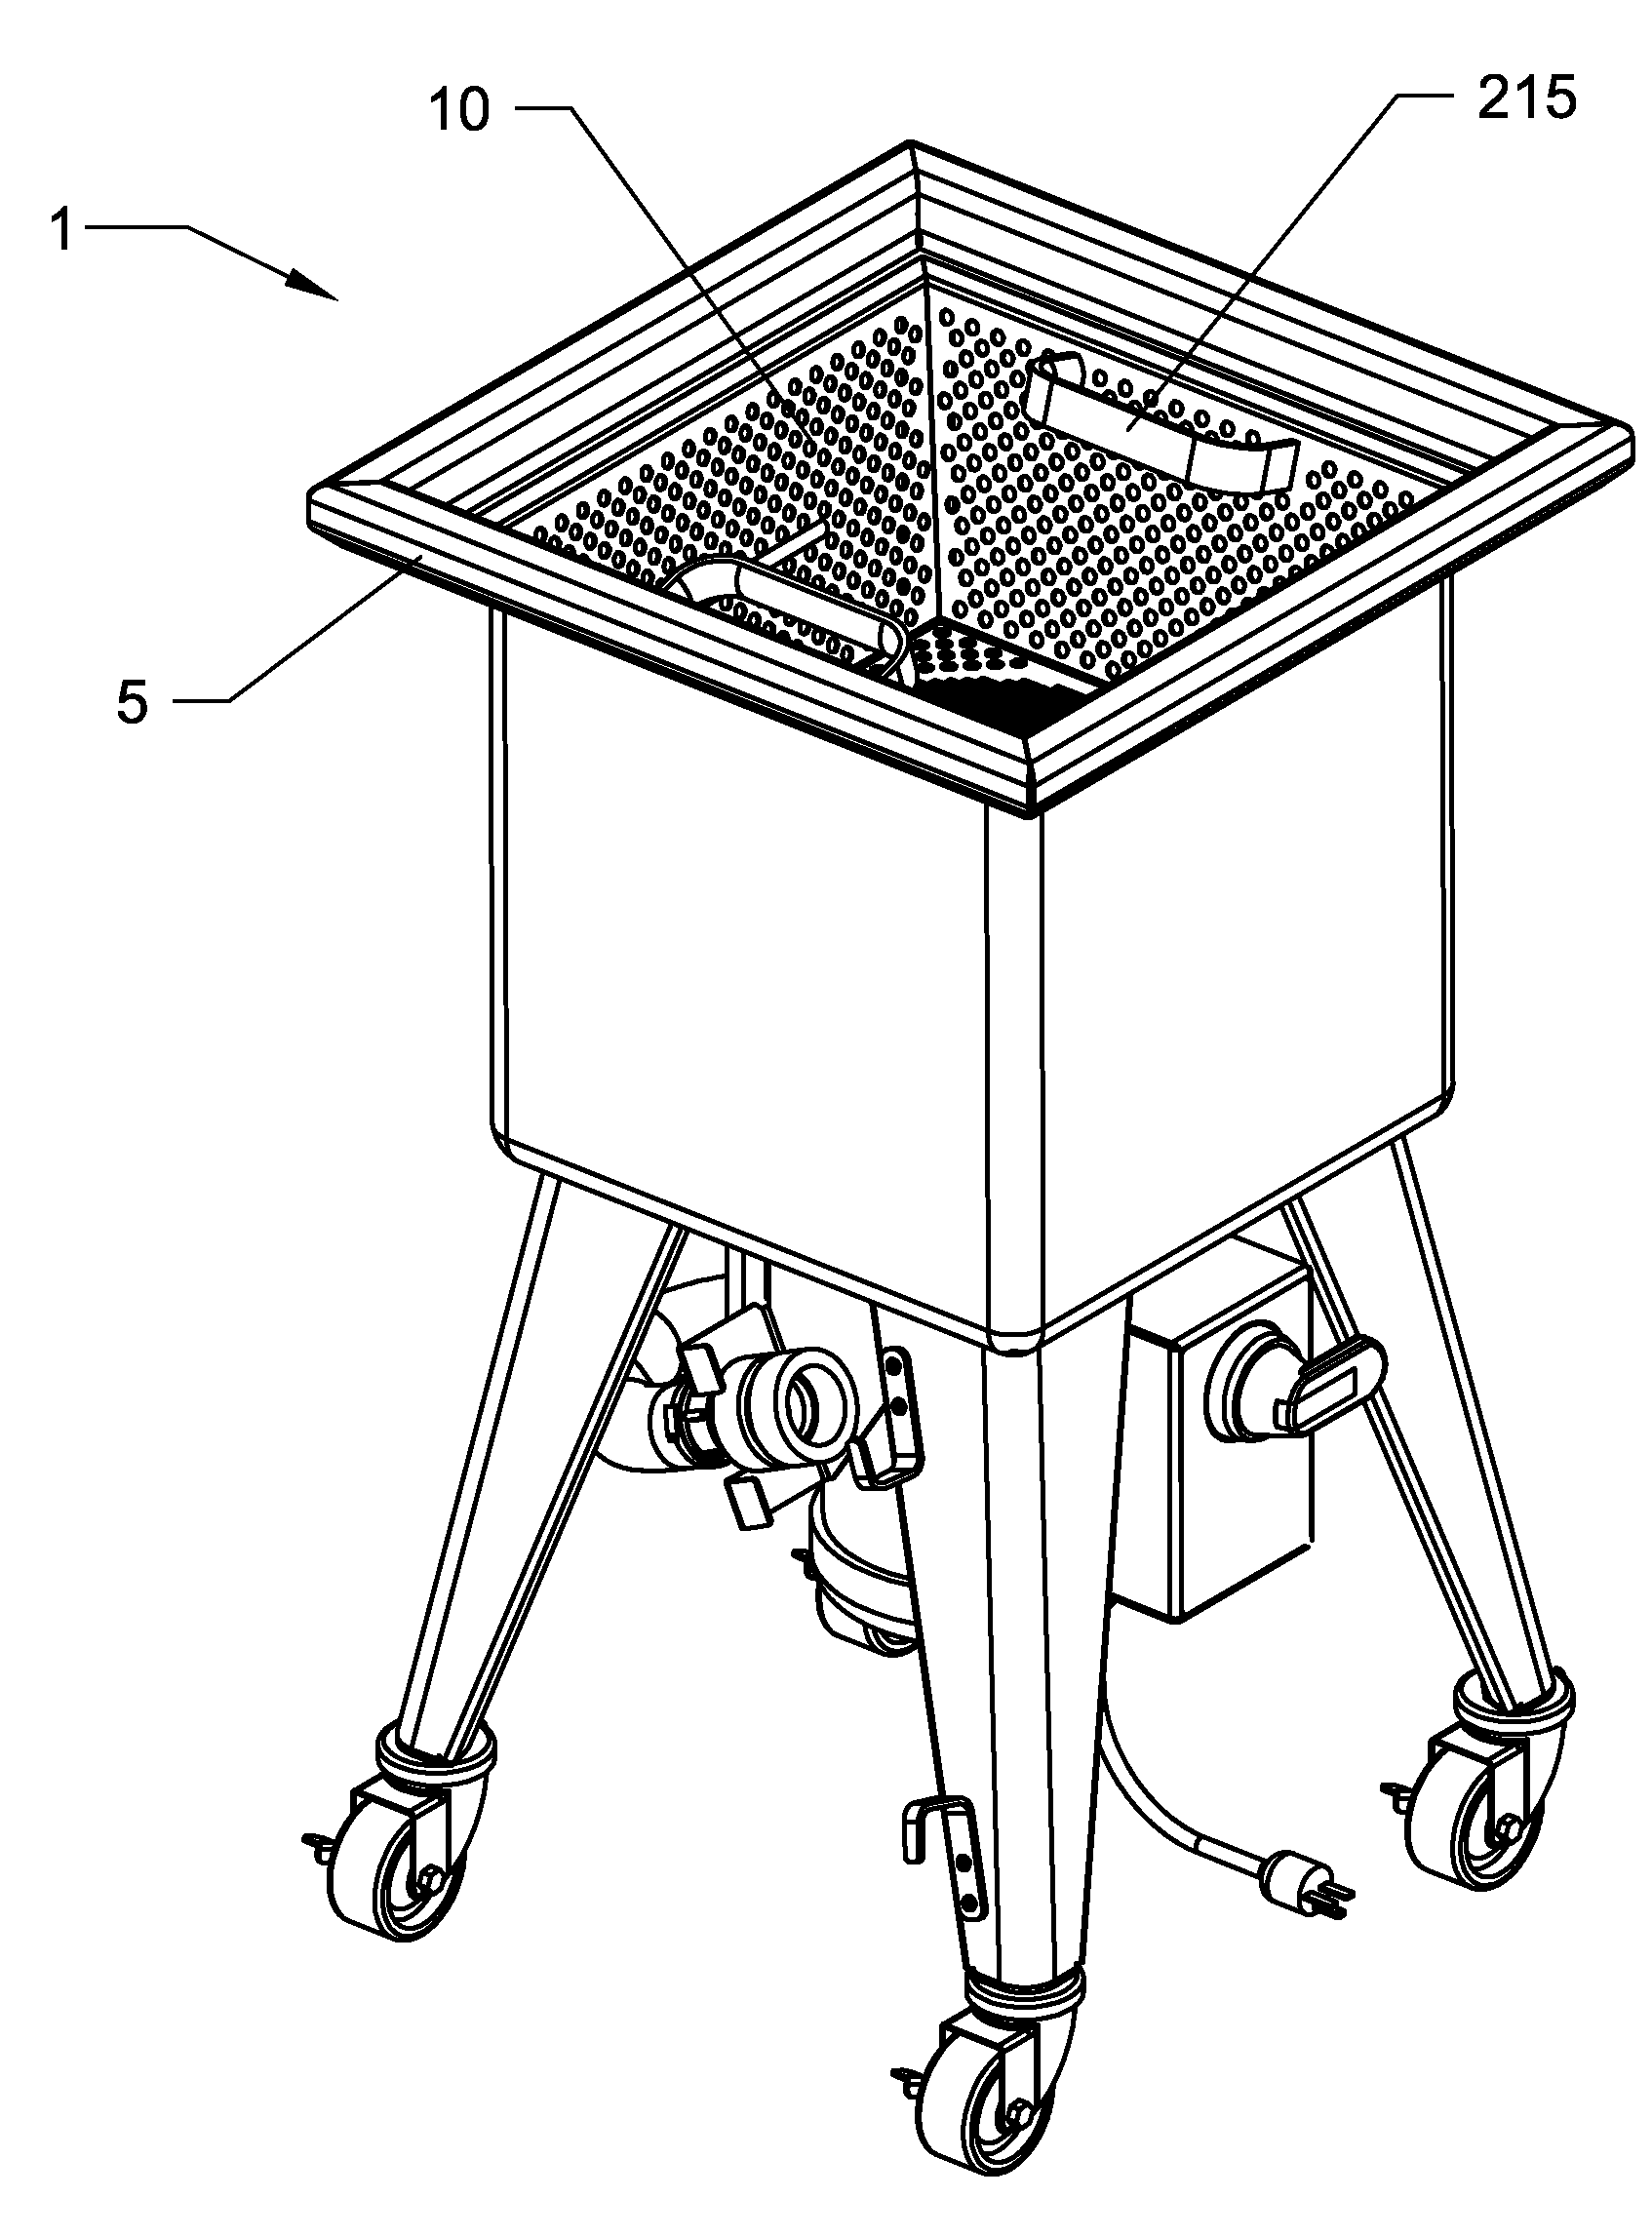 Silverware/flatware or parts washer apparatus and method thereof